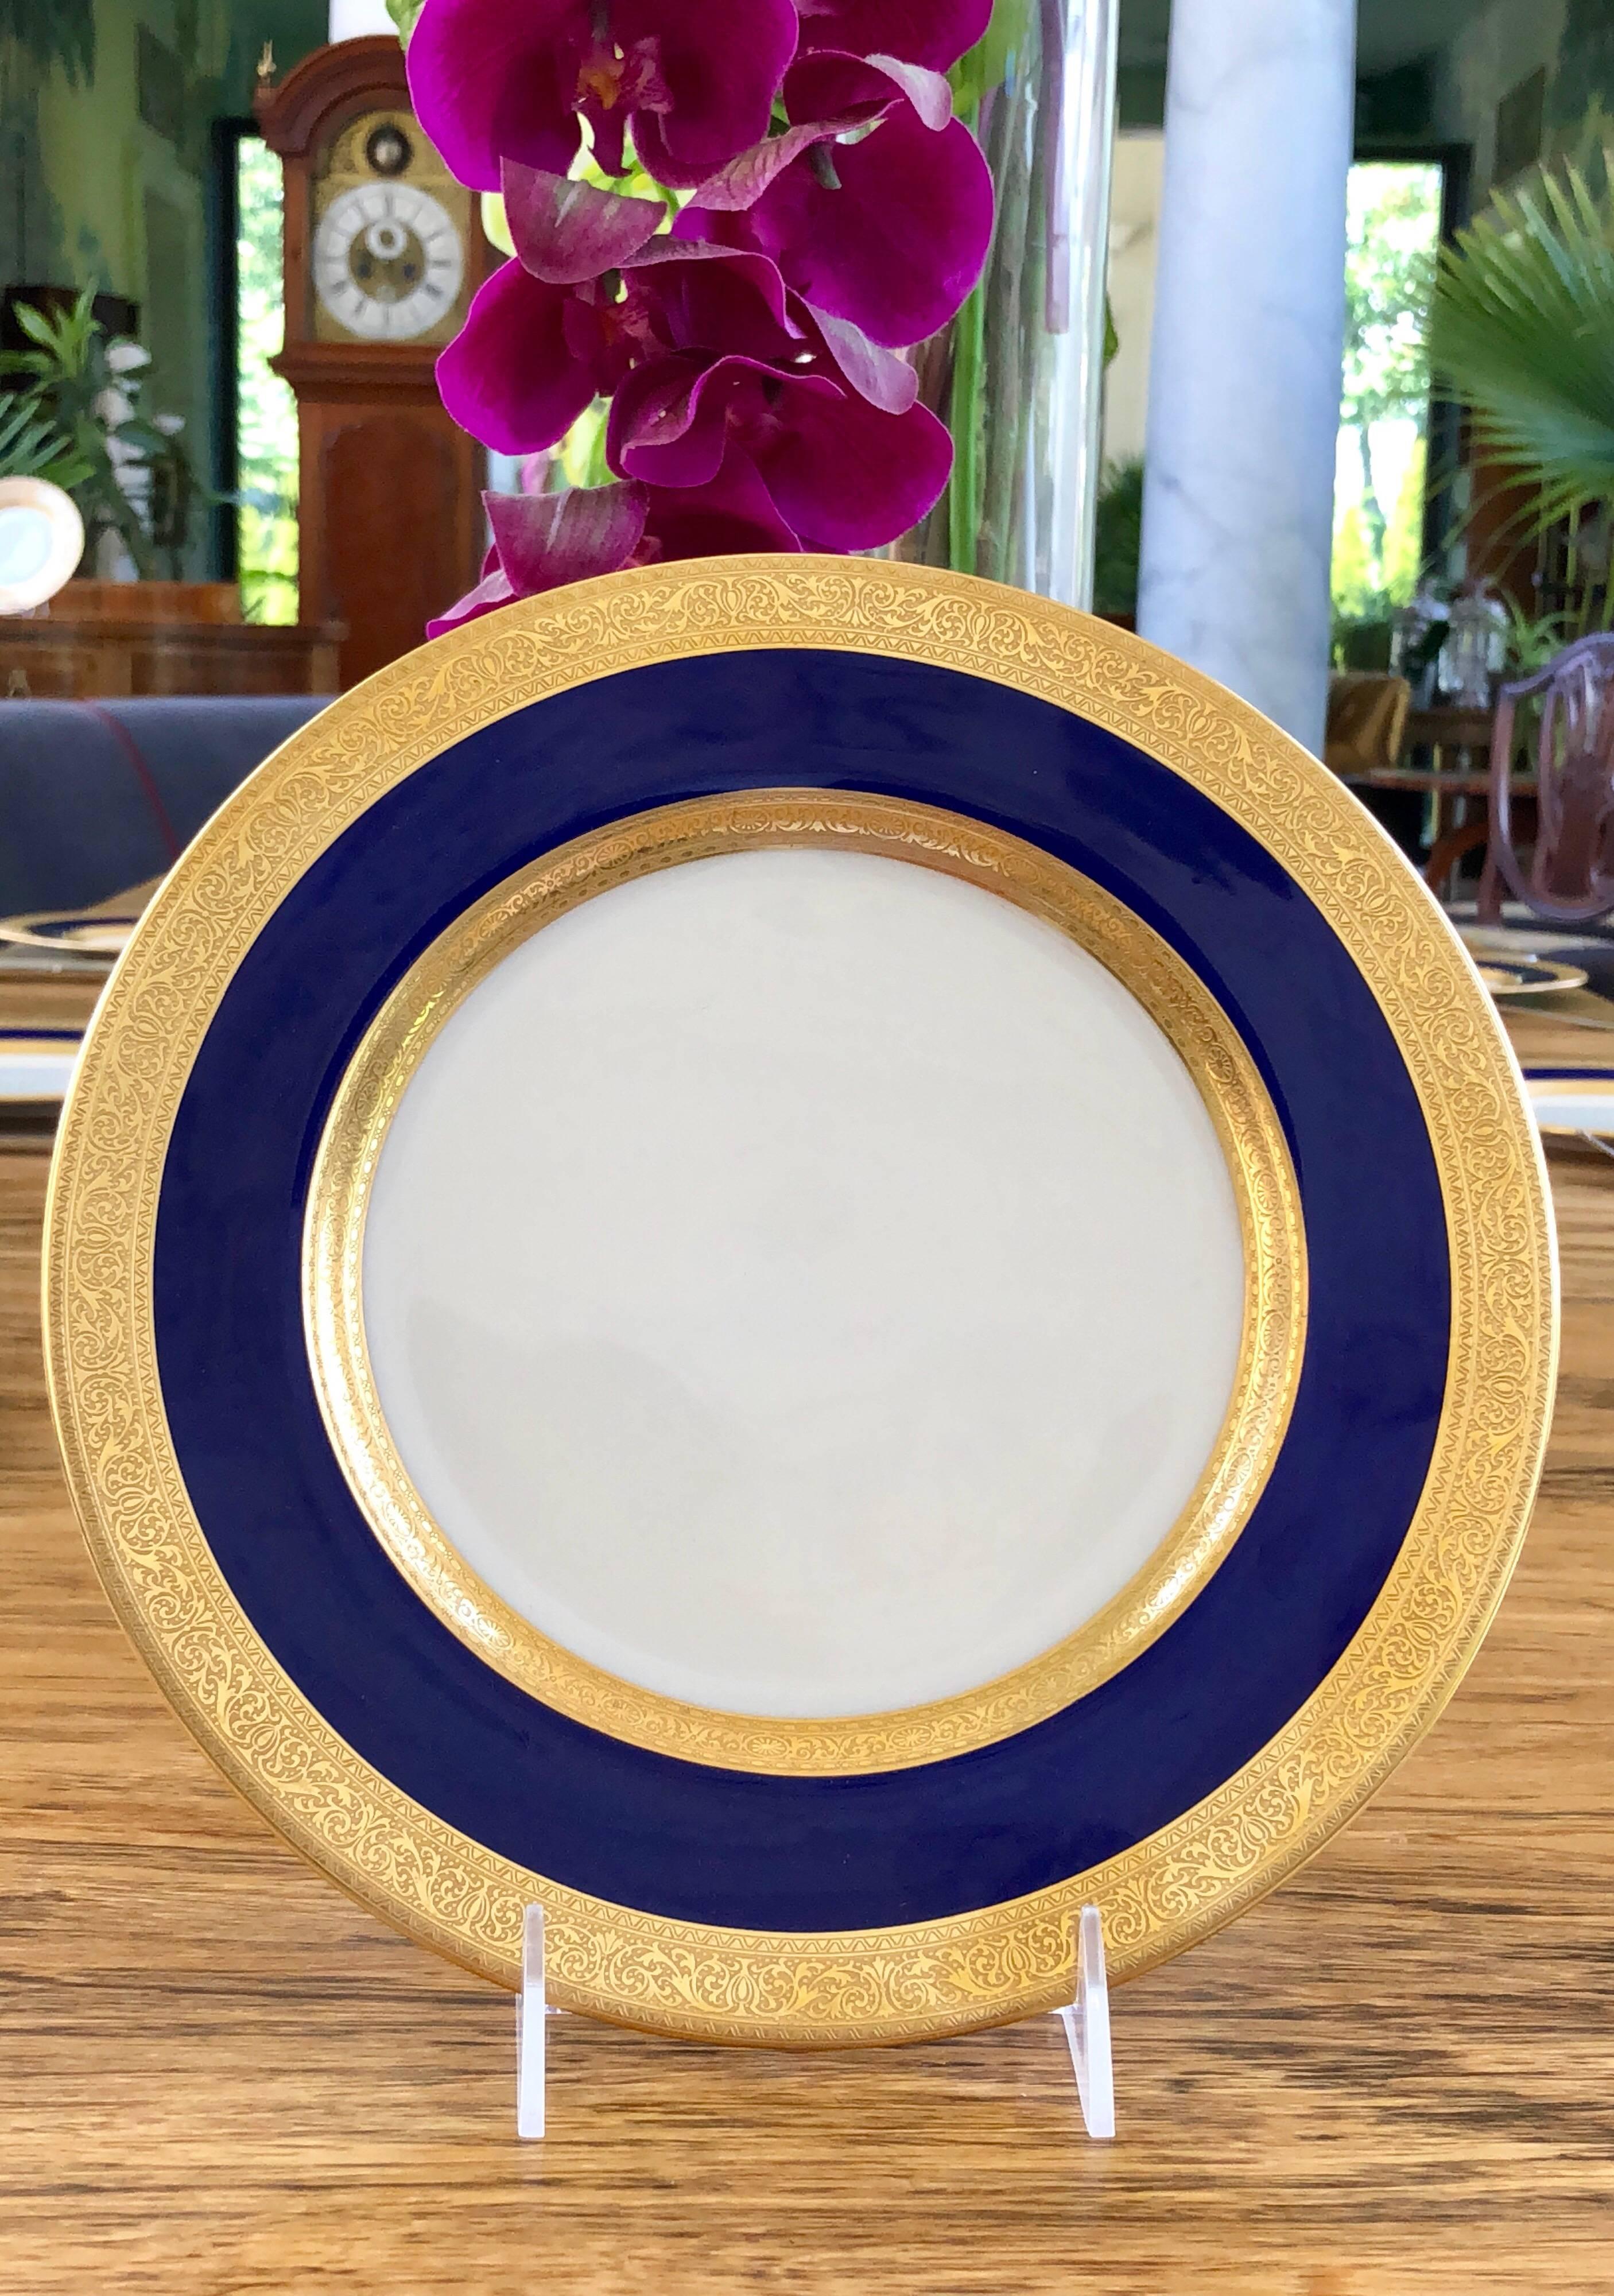 This elegant set of 10 Lenox dinner plates has a cobalt blue border with a 24-karat gold rim.
Made by Lenox and retailed by Marshall Field & Company in Chicago.
Made in the US, circa 1910 it is in remarkable good condition.
 